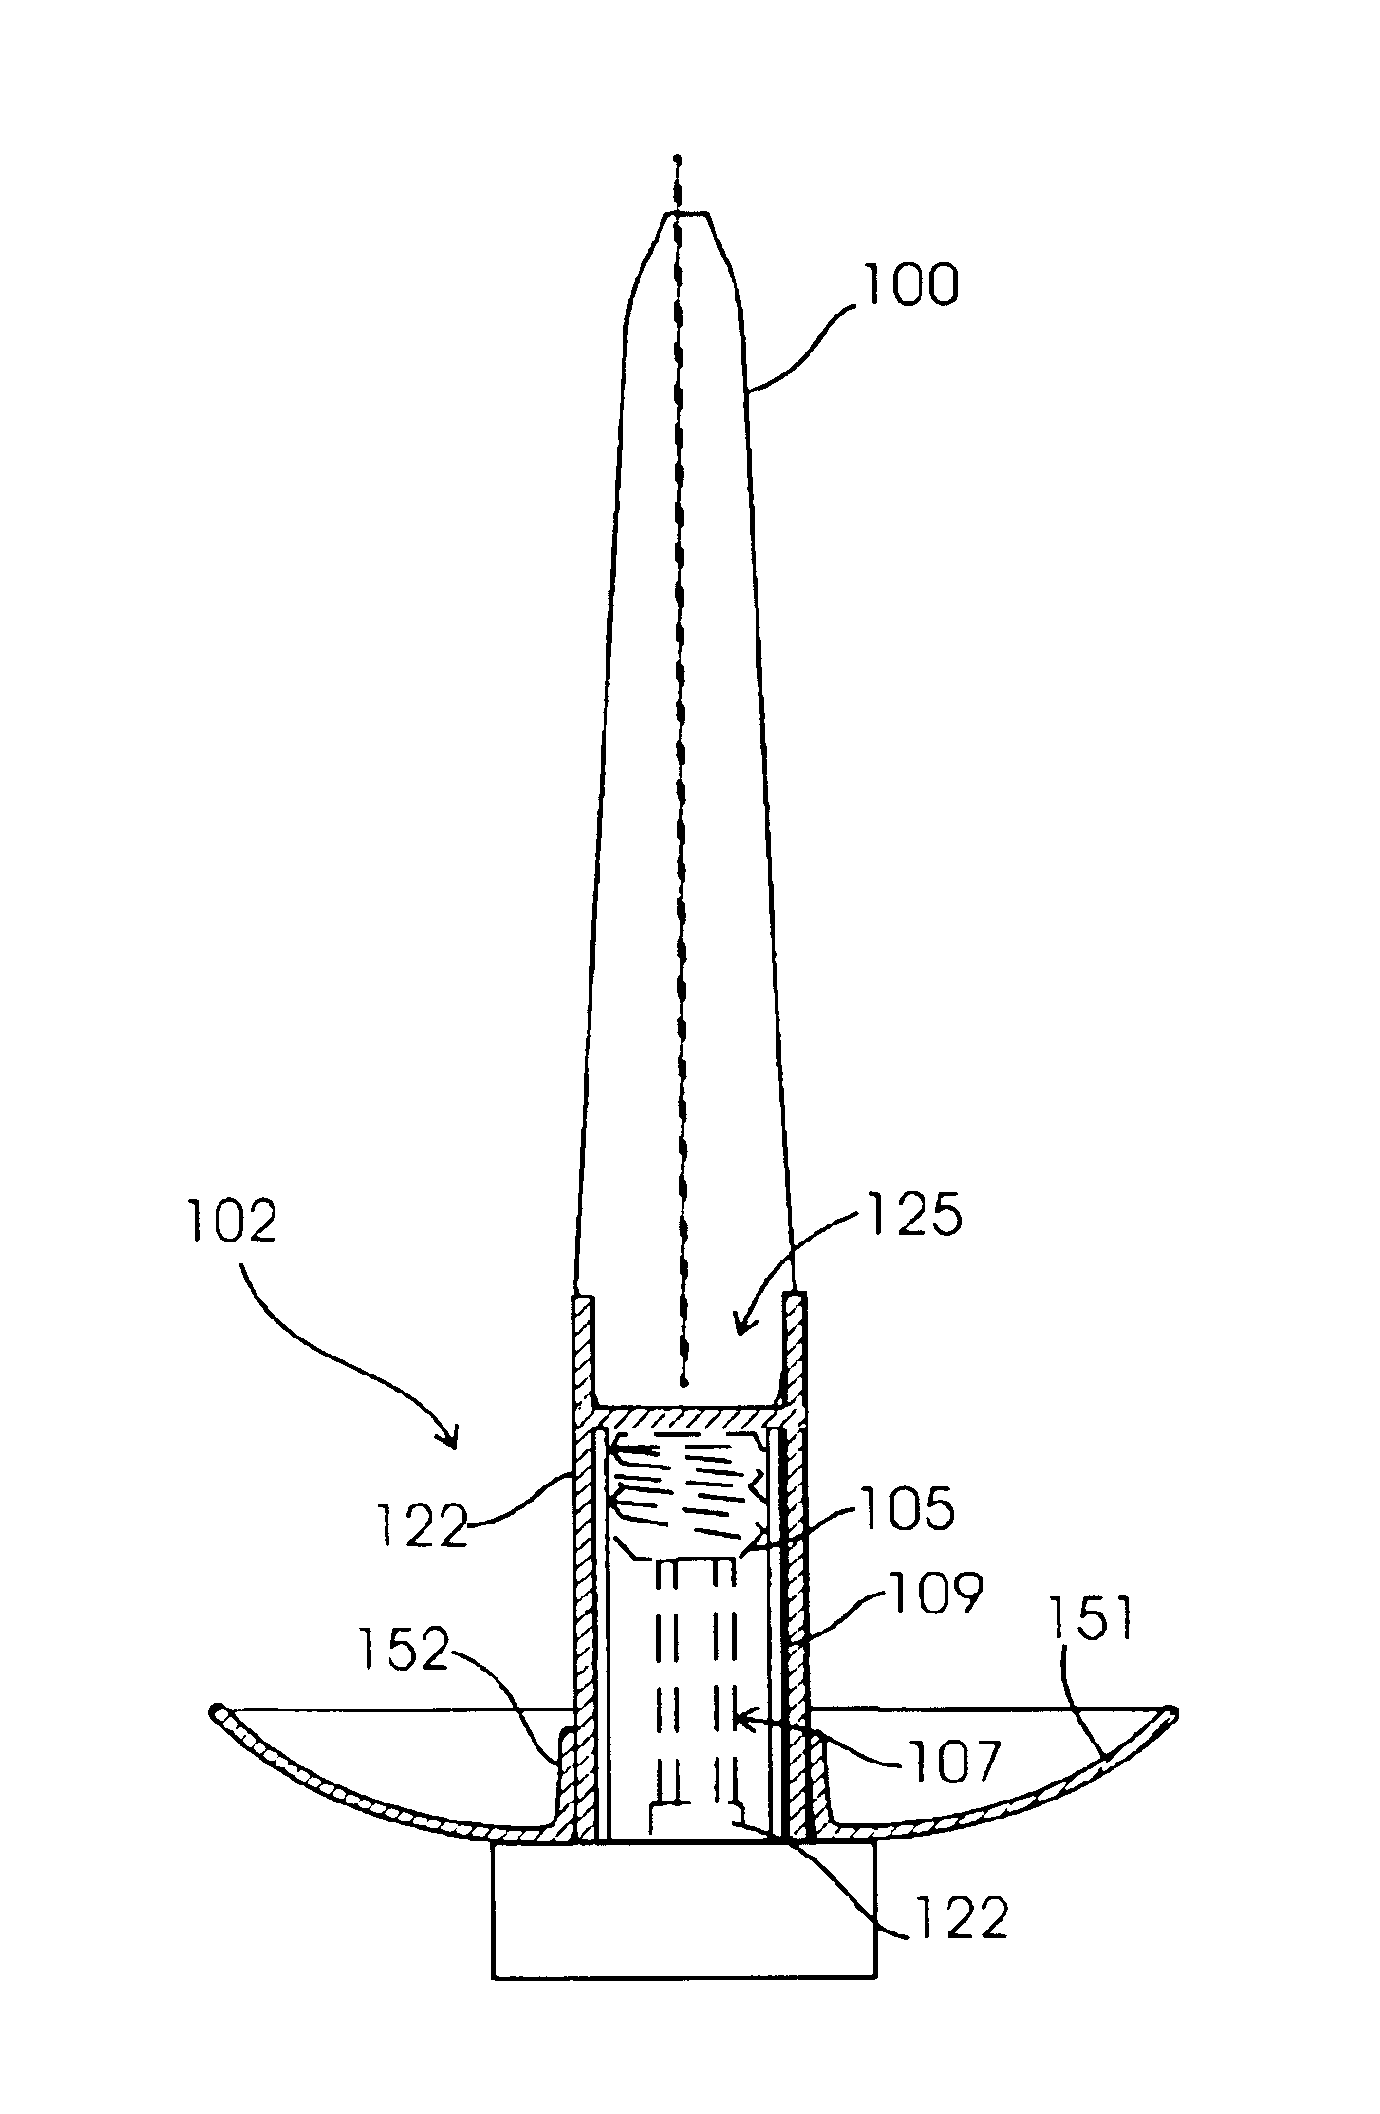 Candle holder adapter for an electric lighting fixture